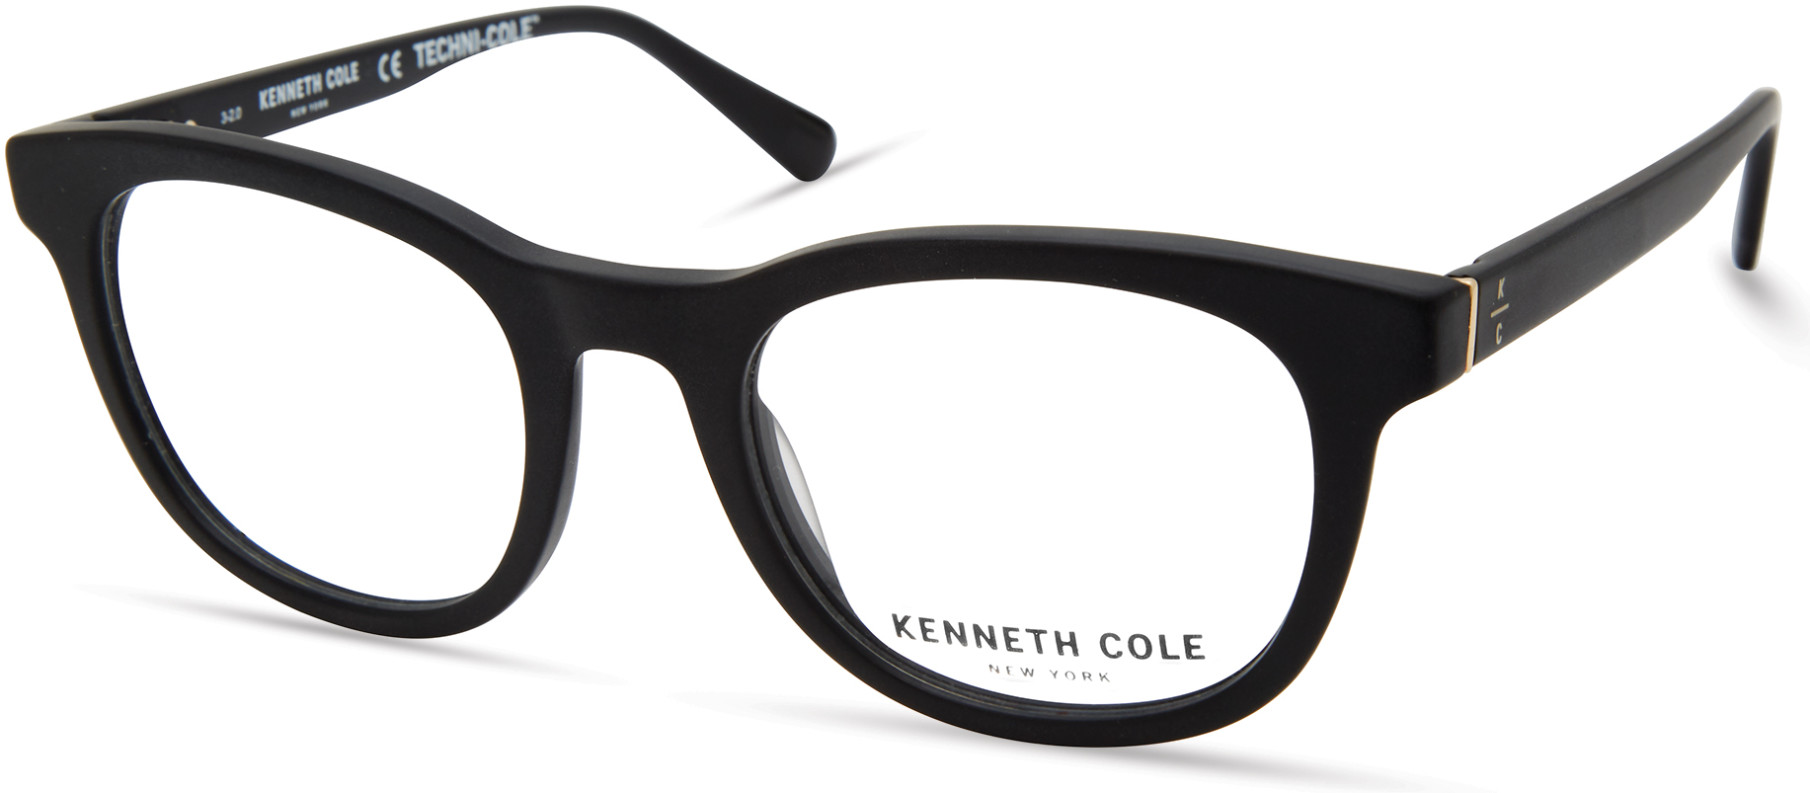 KENNETH COLE NY 0321 002